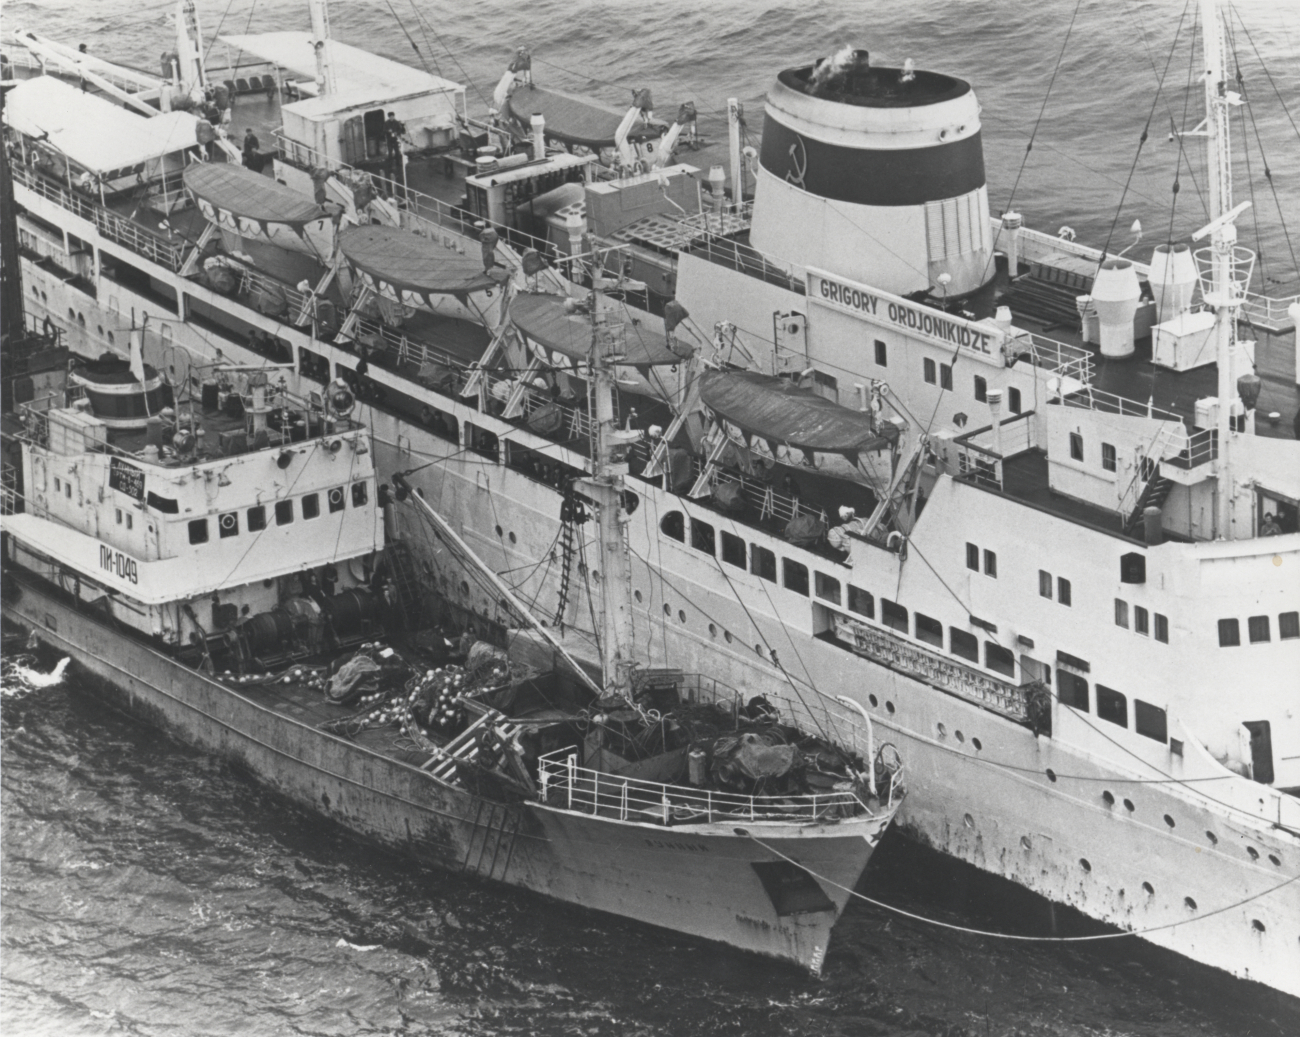 Soviet passenger vessel preparing to deliver a new crew to a trawler